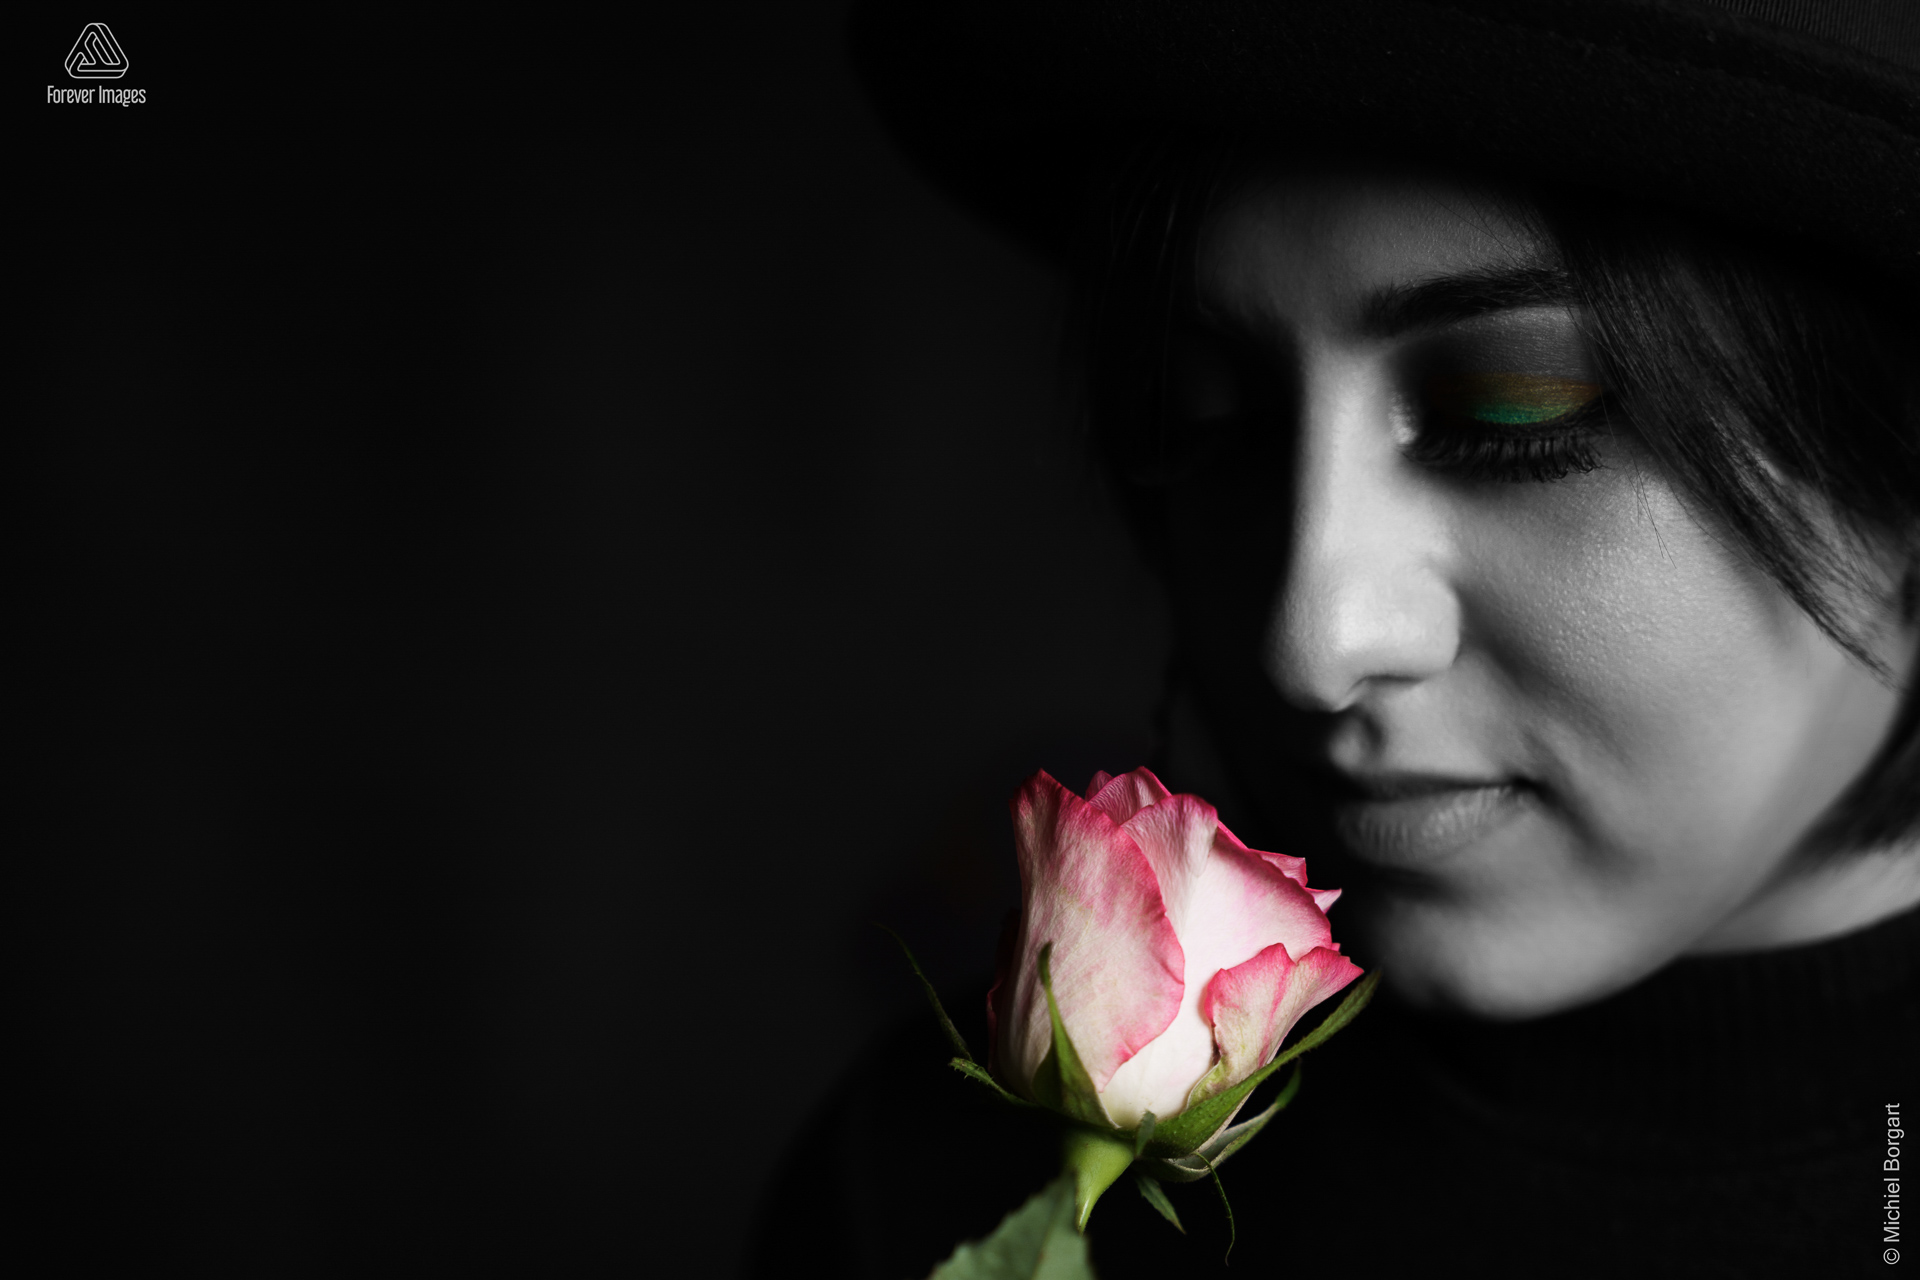 Portrait photo black and white B&W low-key selective color young lady smelling a rose | Arfa | Portrait Photographer Michiel Borgart - Forever Images.